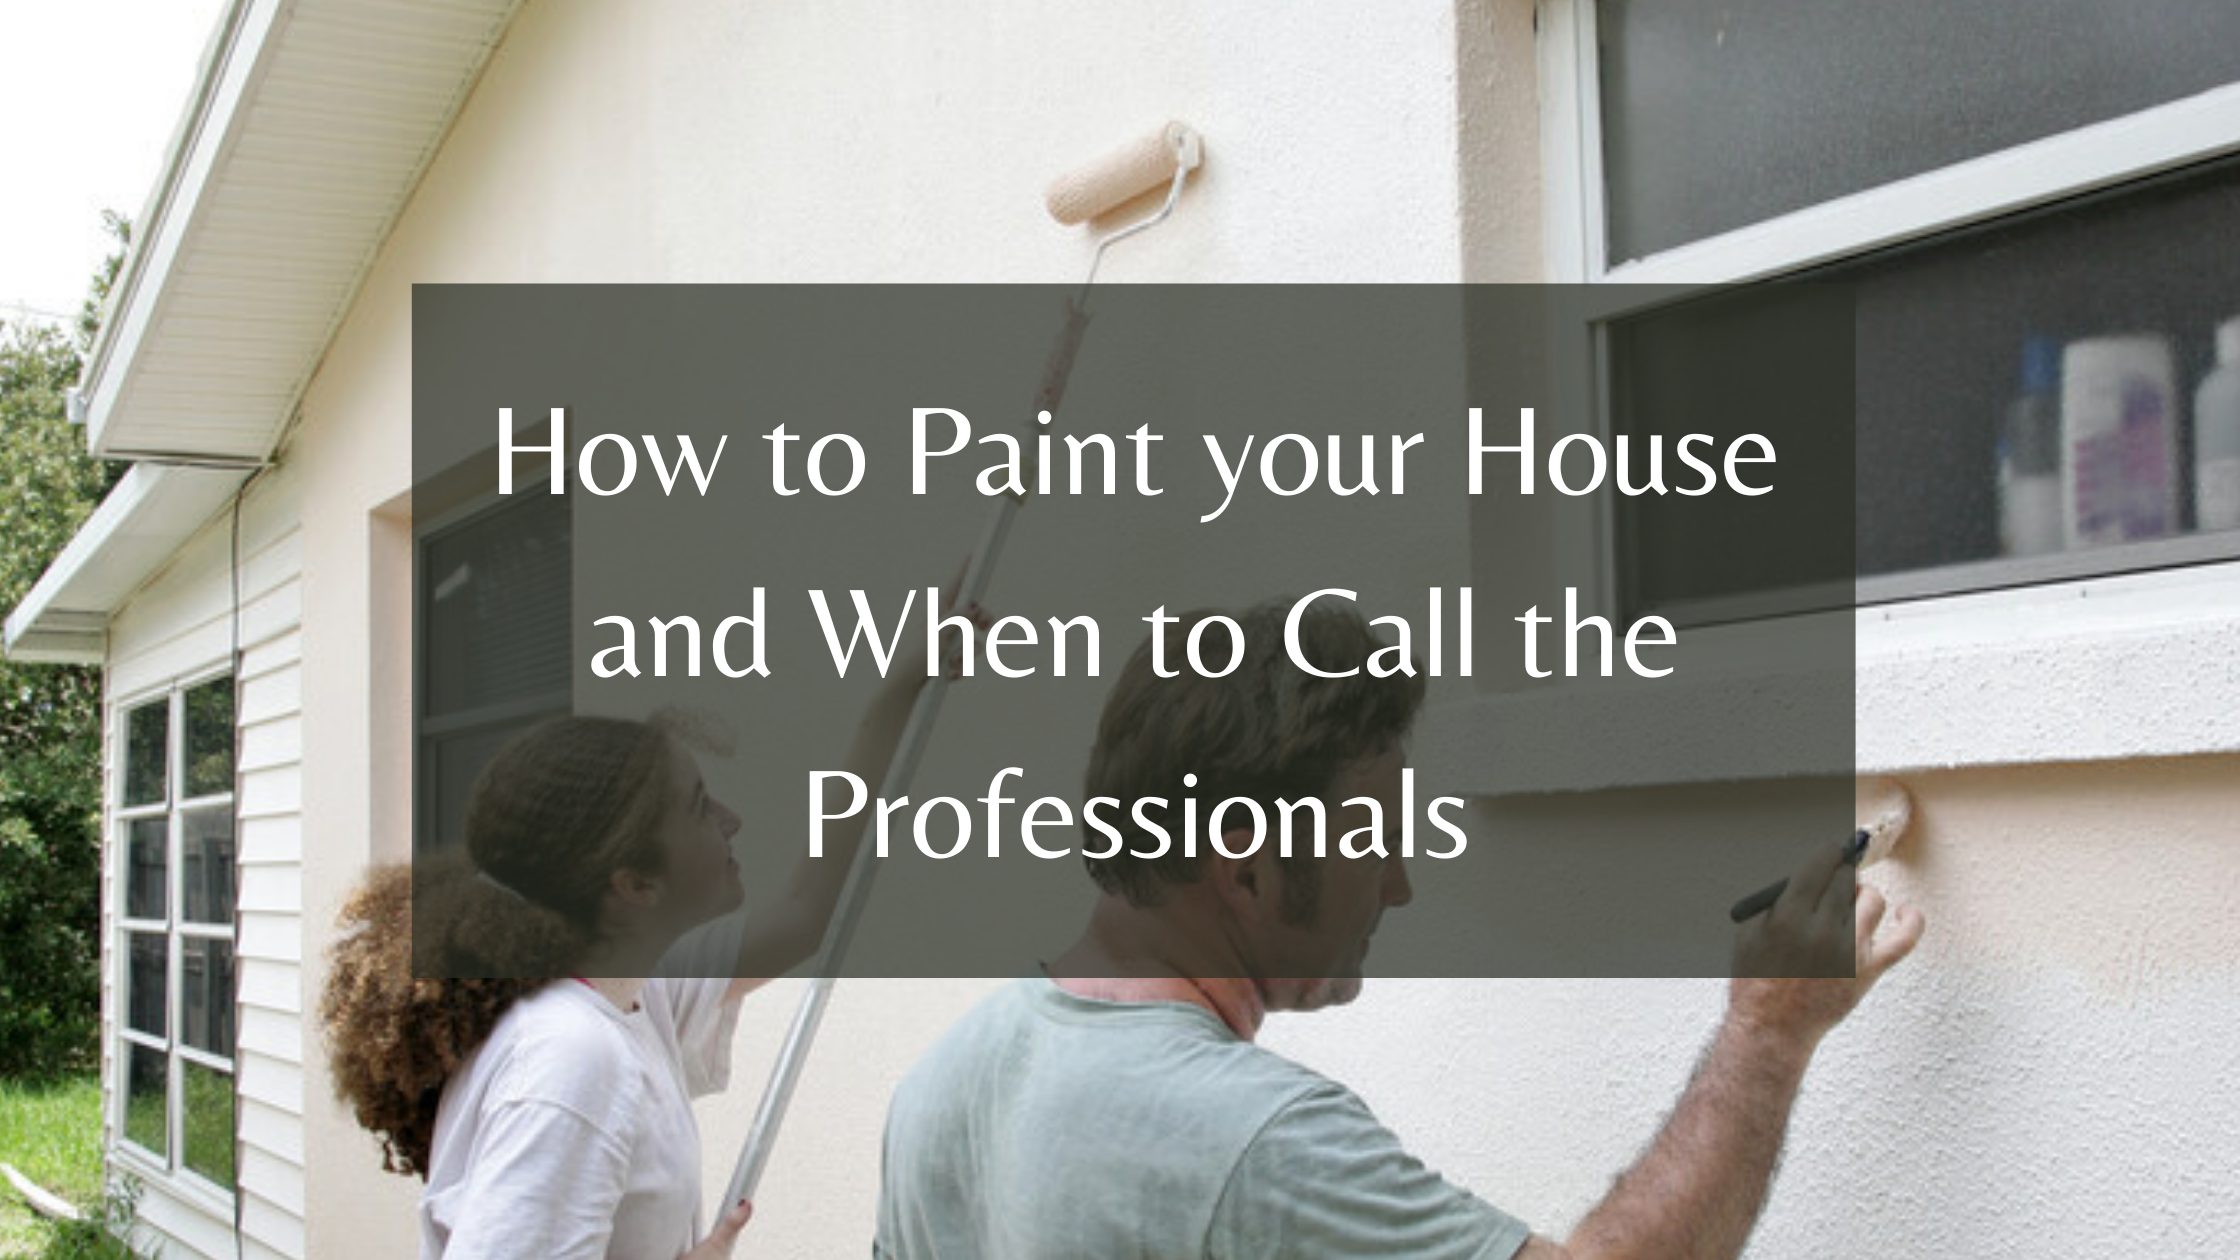 https://雷竞技下载链接官网appwww.explorizers.com/wp-content/uploads/2021/05/How-to-Paint-your-House-and-When-to-Call-the-Professionals.png